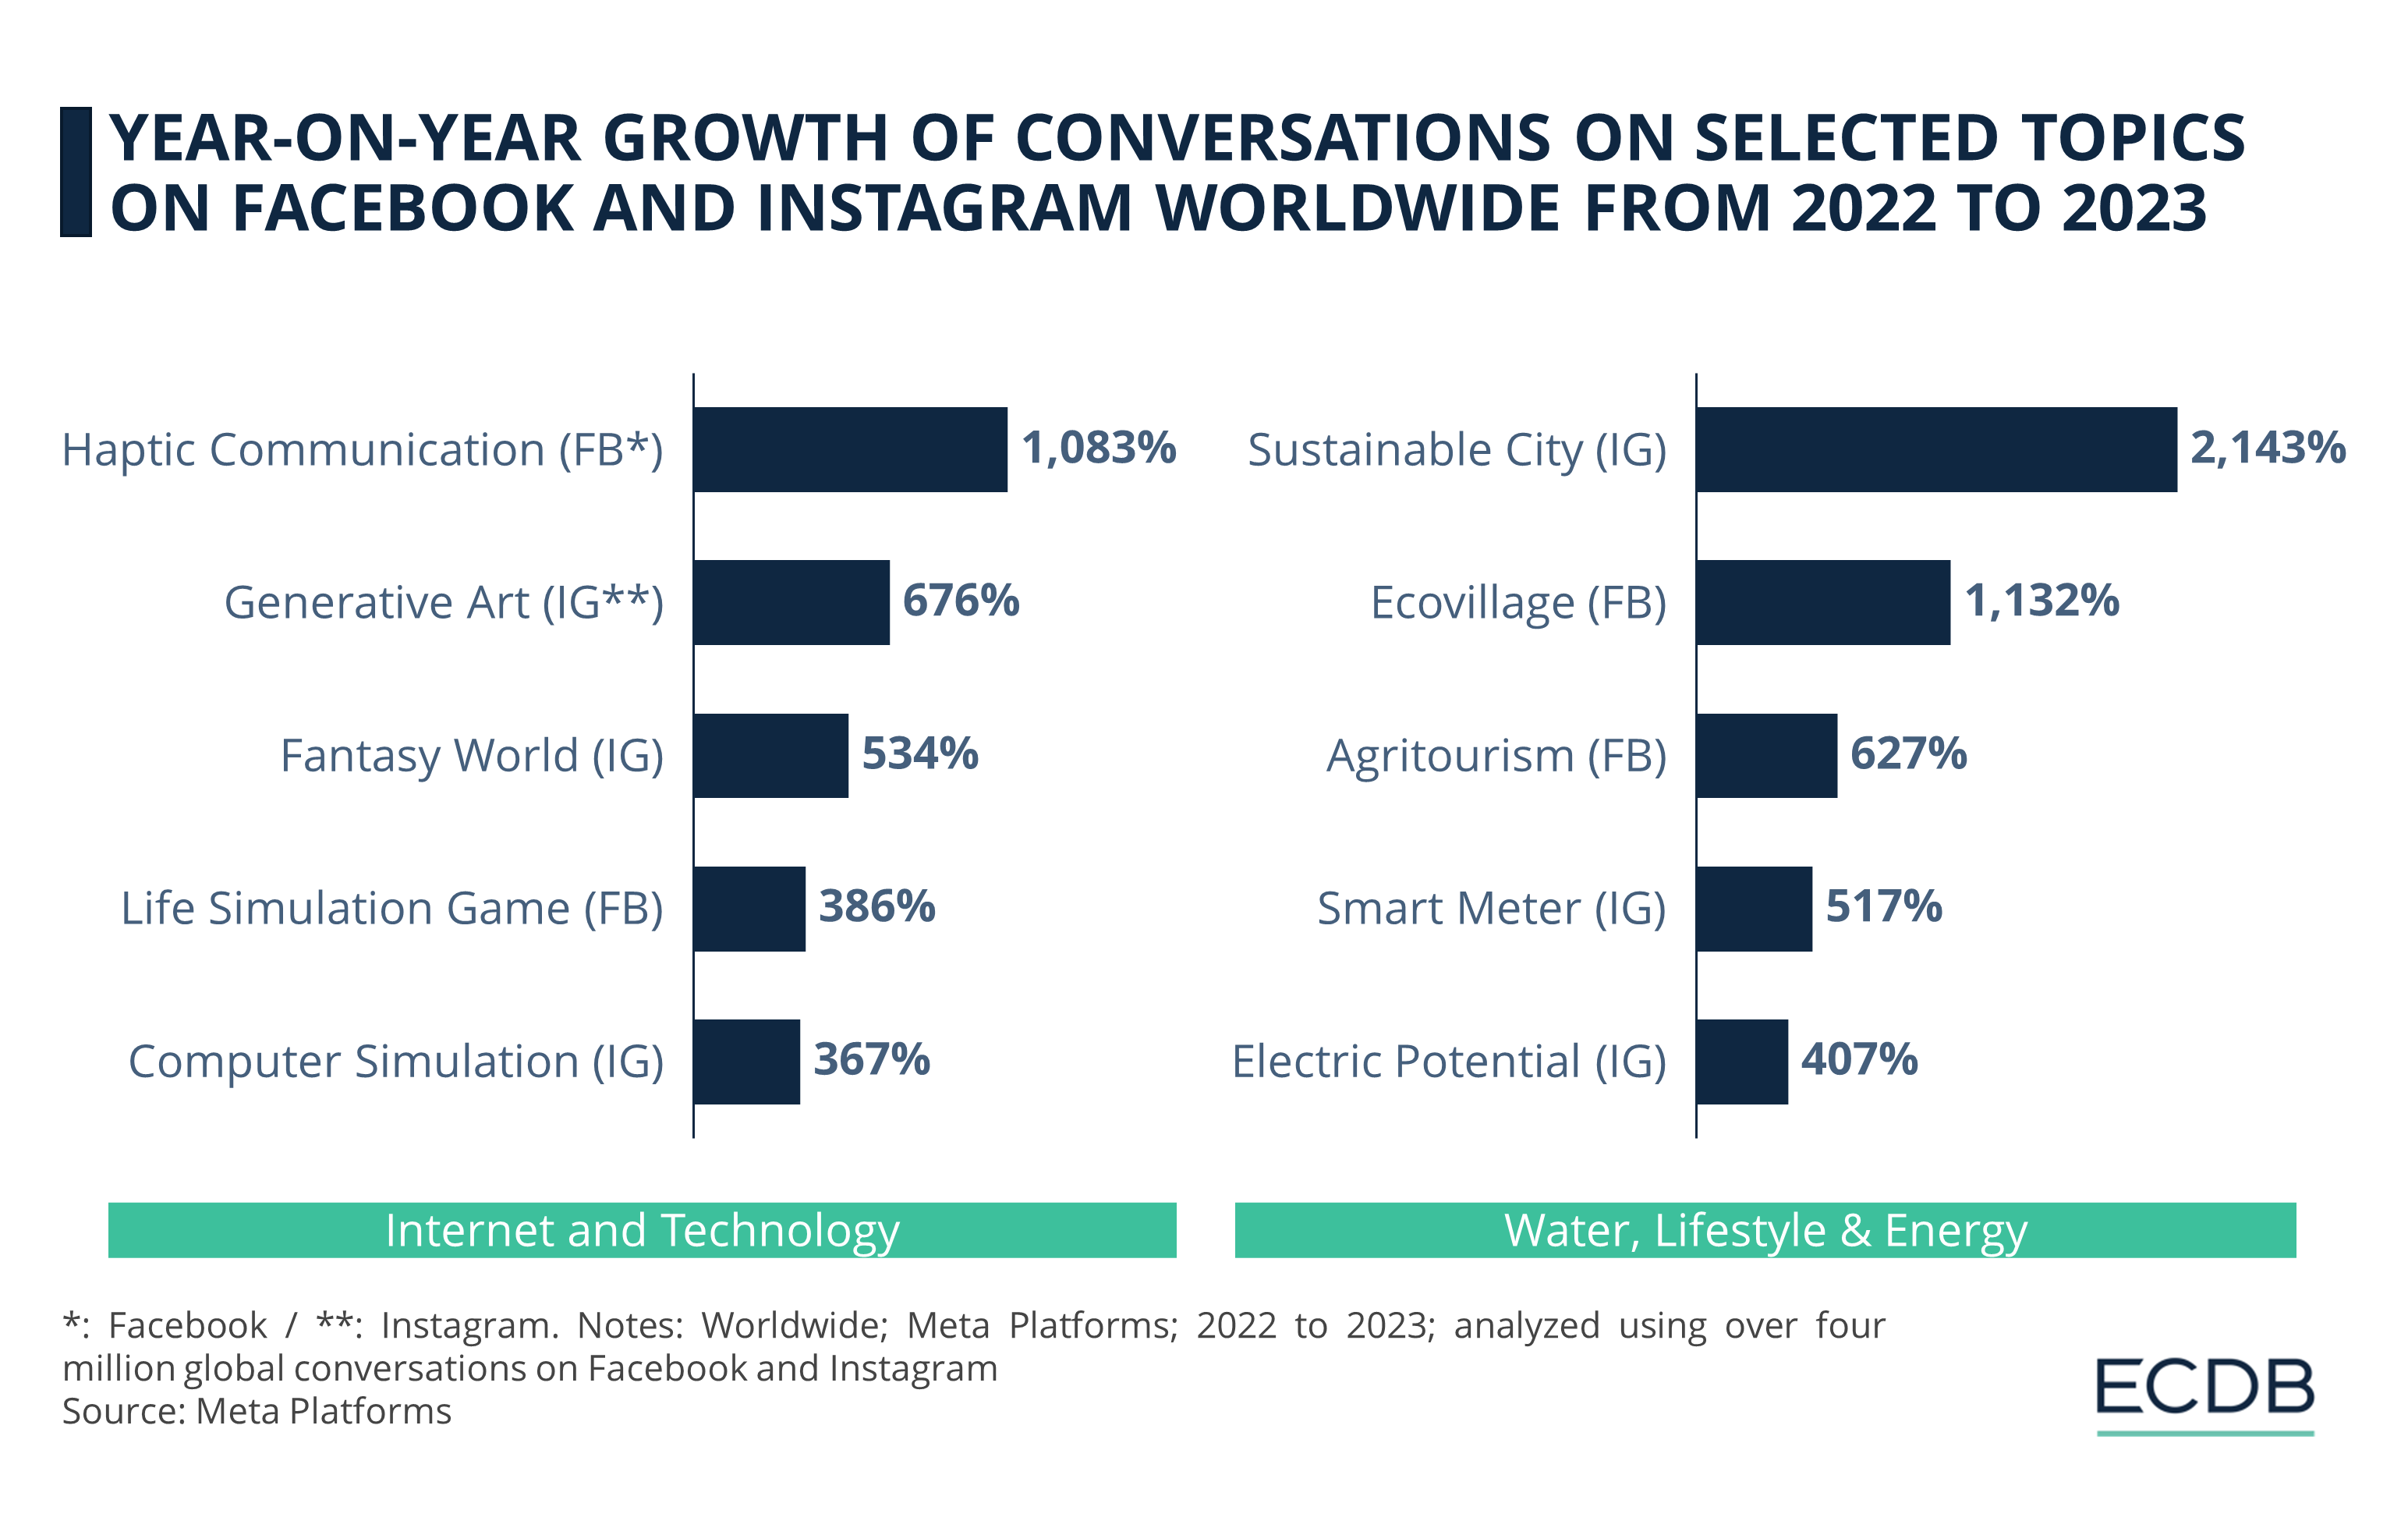 Year-on-Year Growth of Conversations on Selected Topics on Facebook and Instagram Worldwide from 2022 to 2023